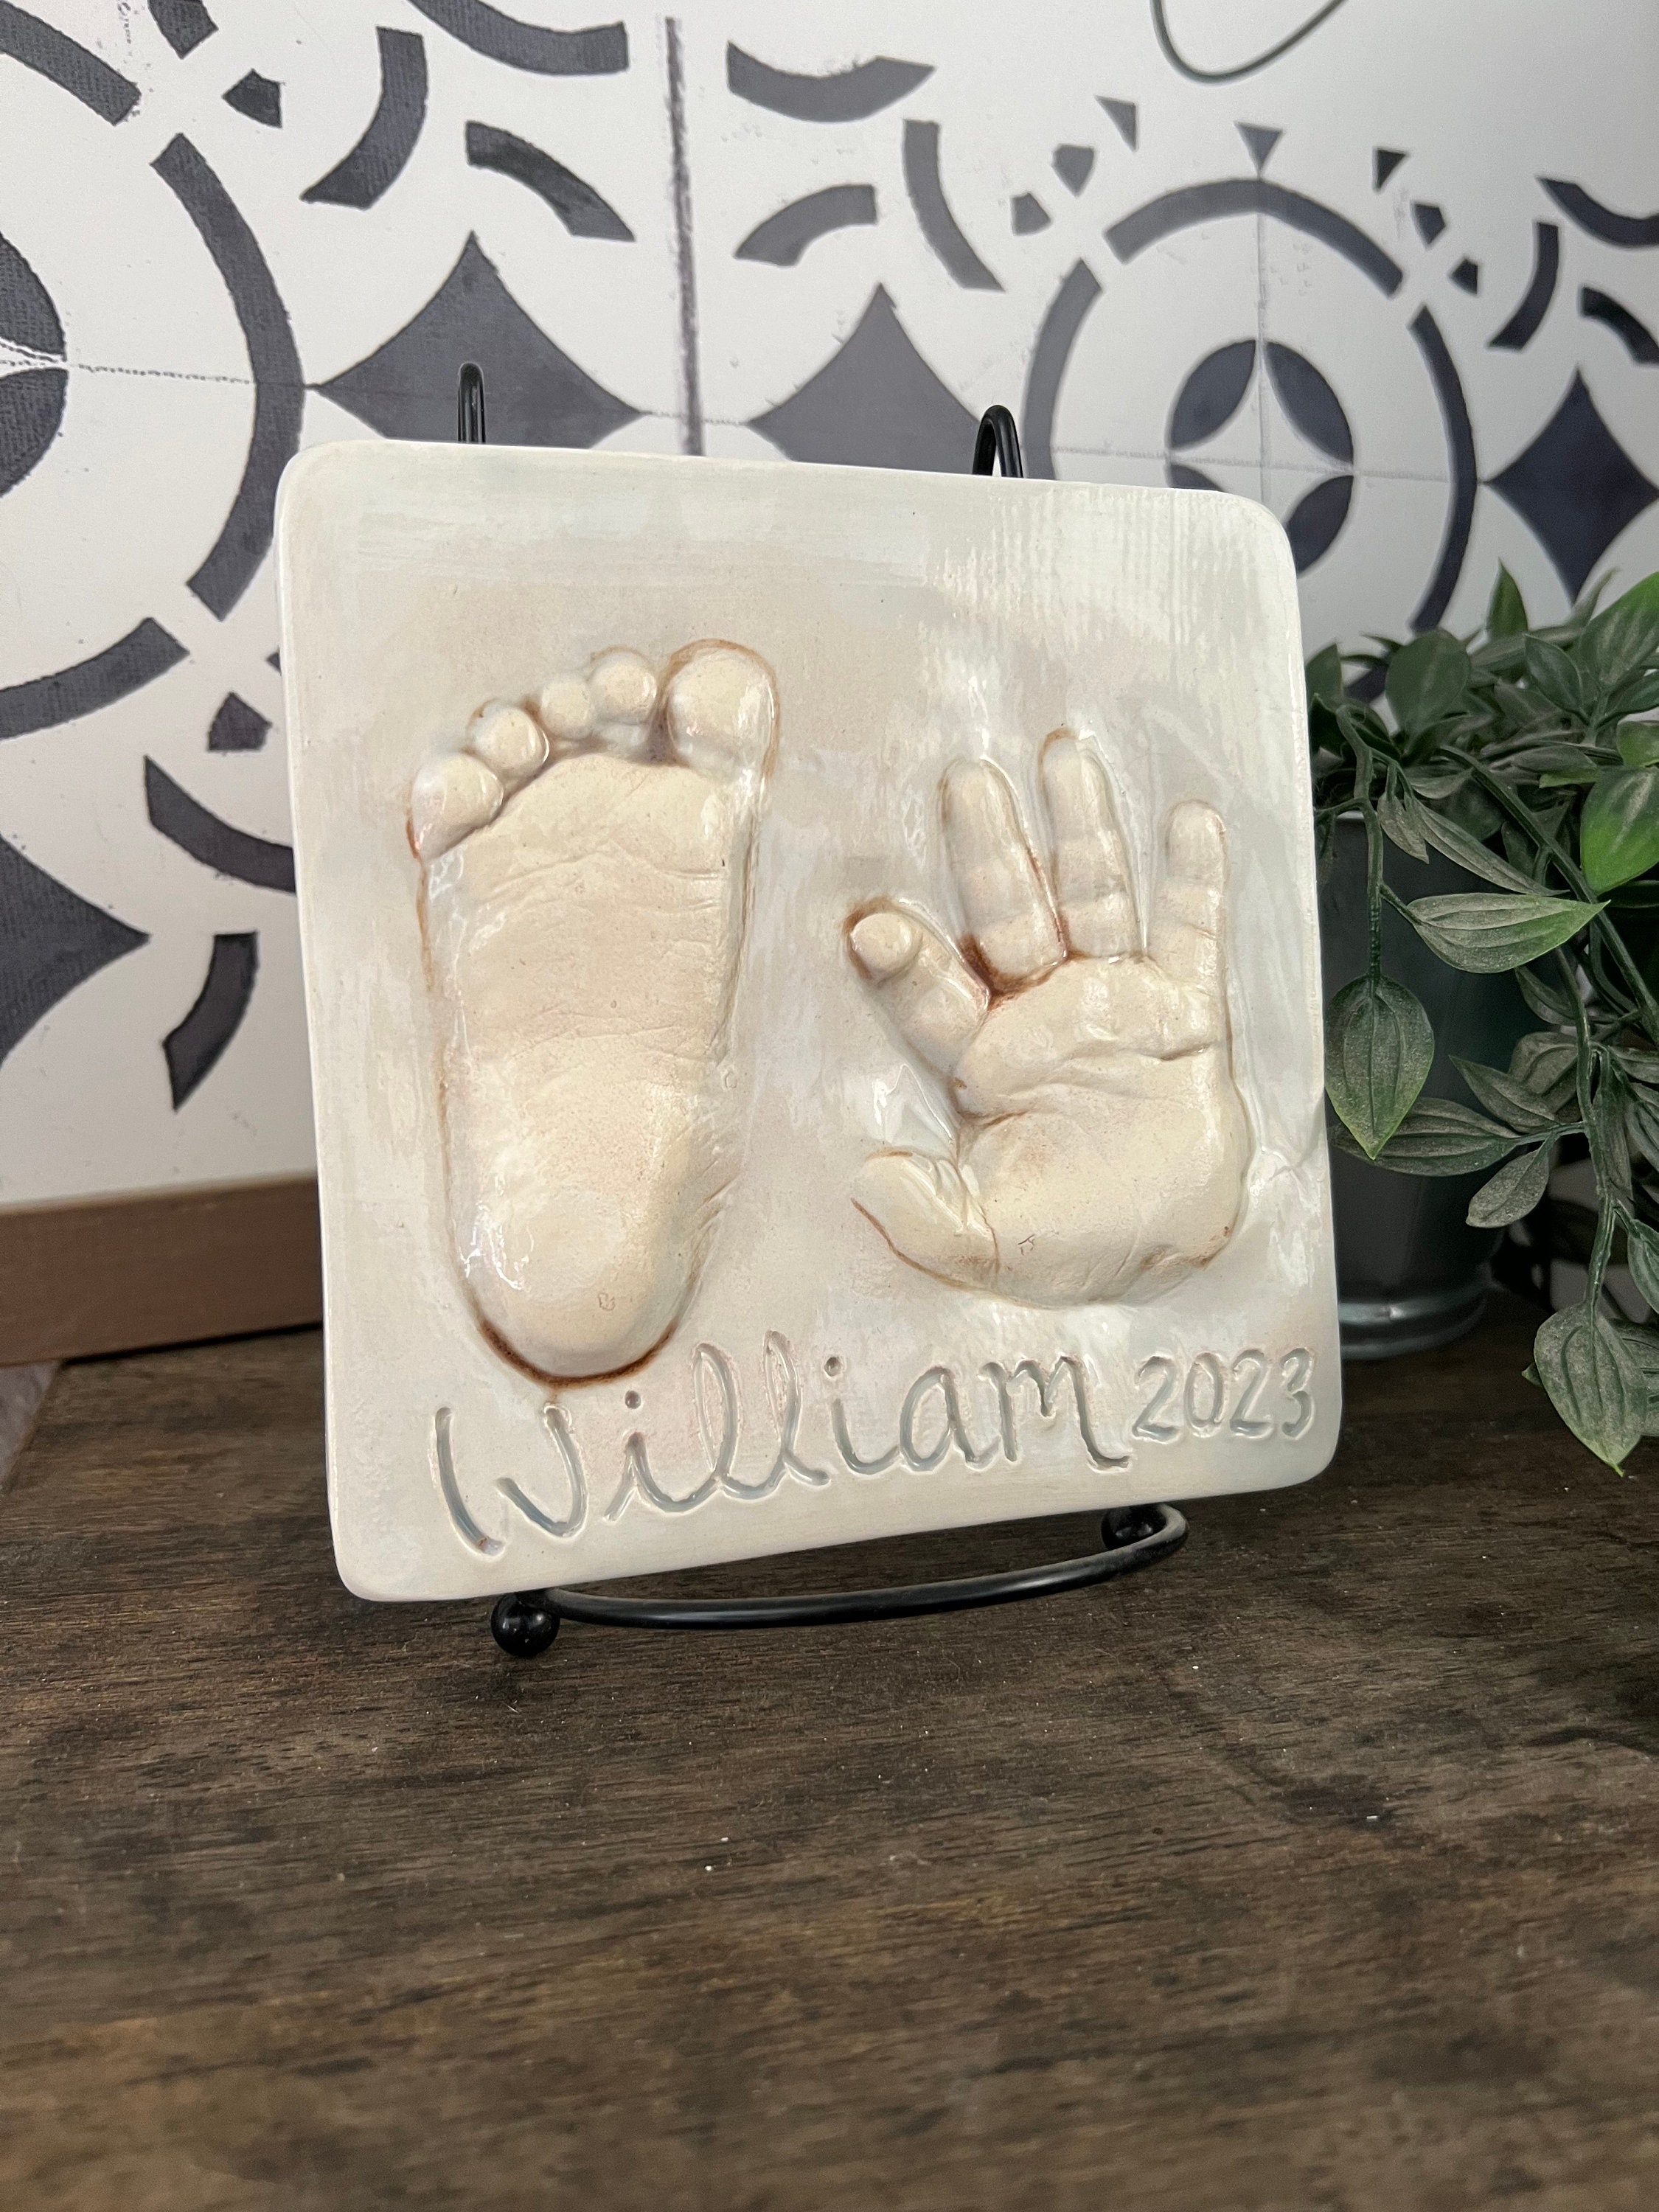 DIY Baby Plaster Mold 3D Hand Foot Print Mold for Baby Souvenir